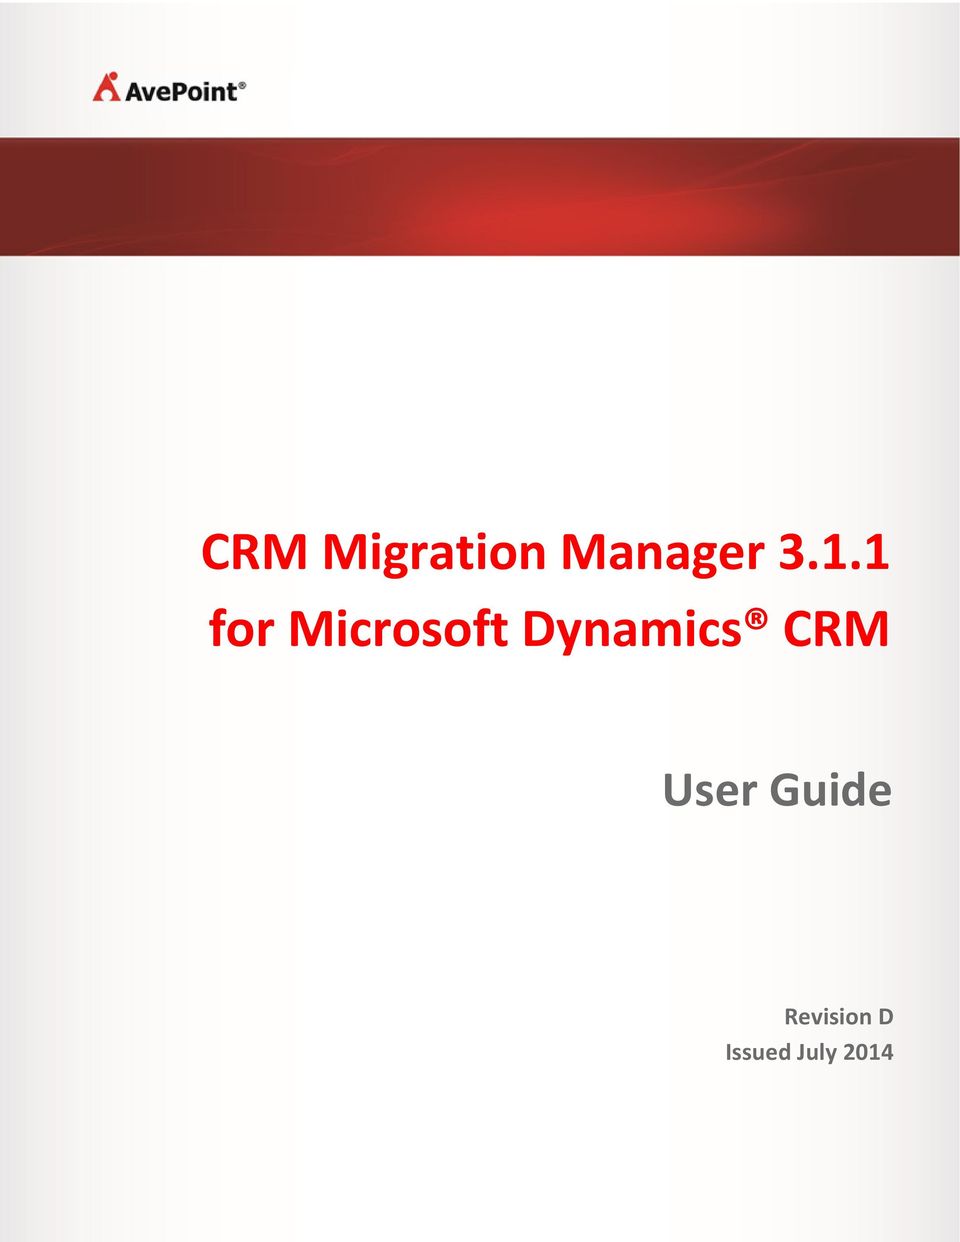 Dynamics CRM User Guide